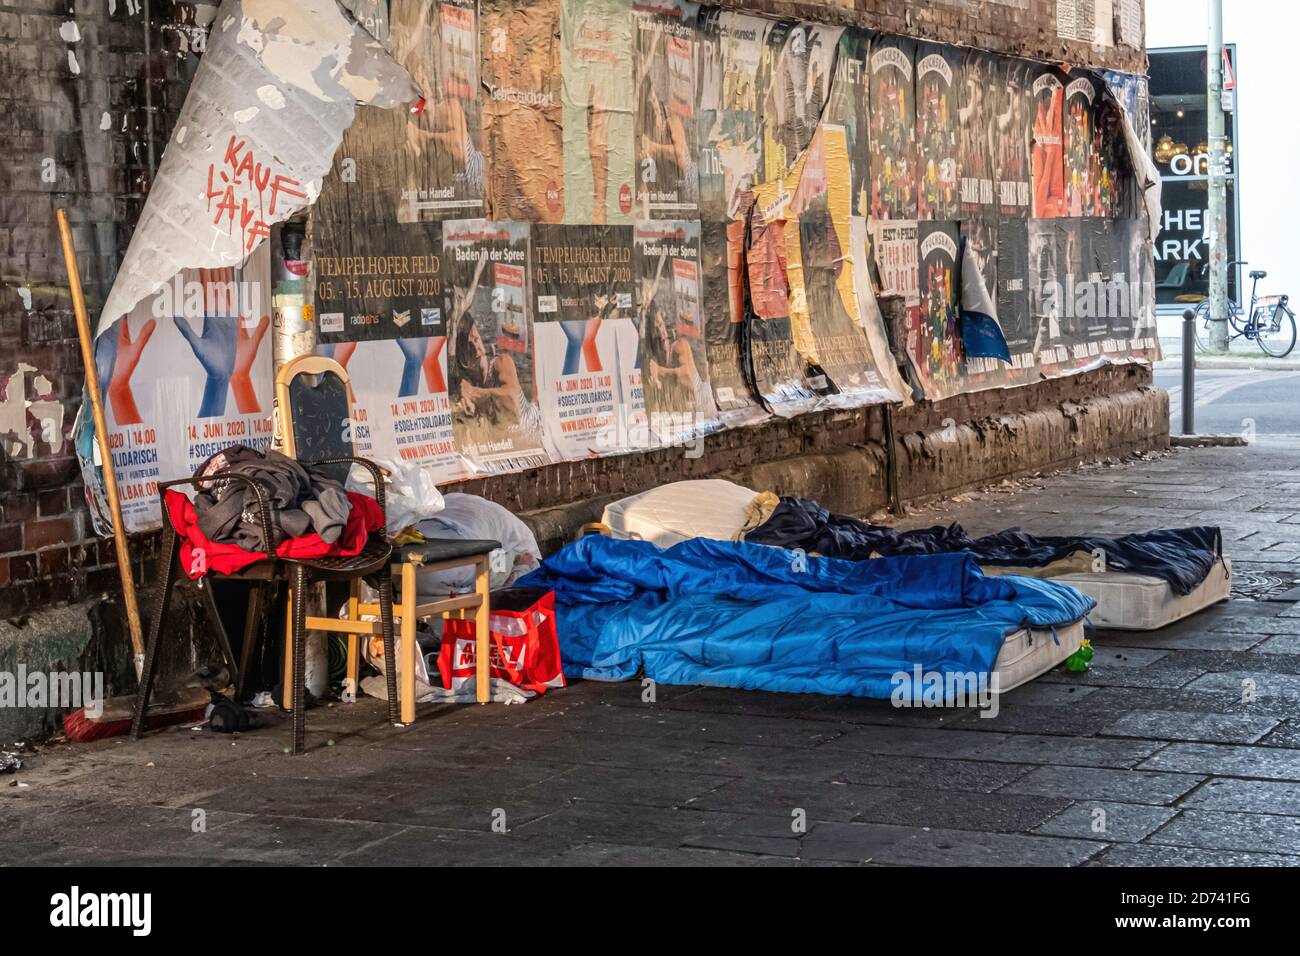 Homeless person's home with two mattresses,chairs,bedding and broom under a railway bridge in Mitte, Berlin Stock Photo